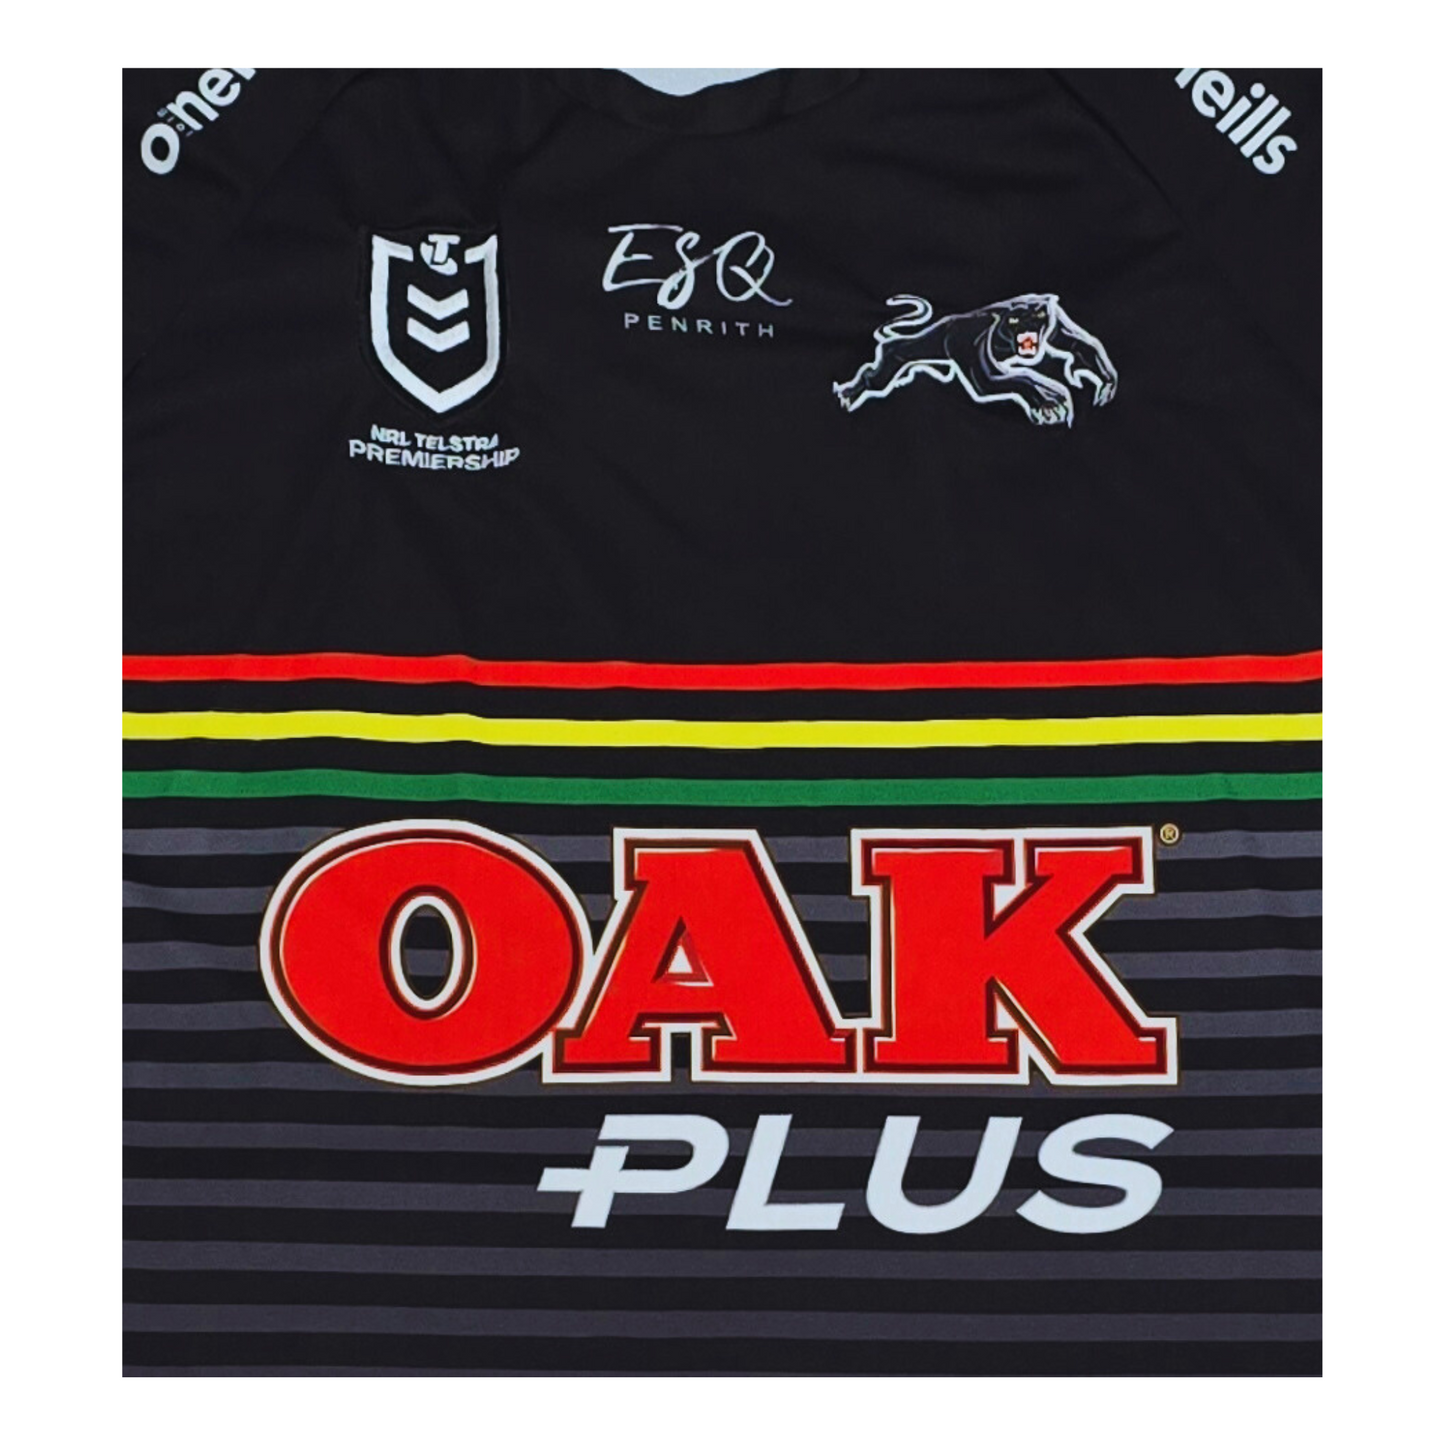 Penrith Panthers 2020 Home Jersey